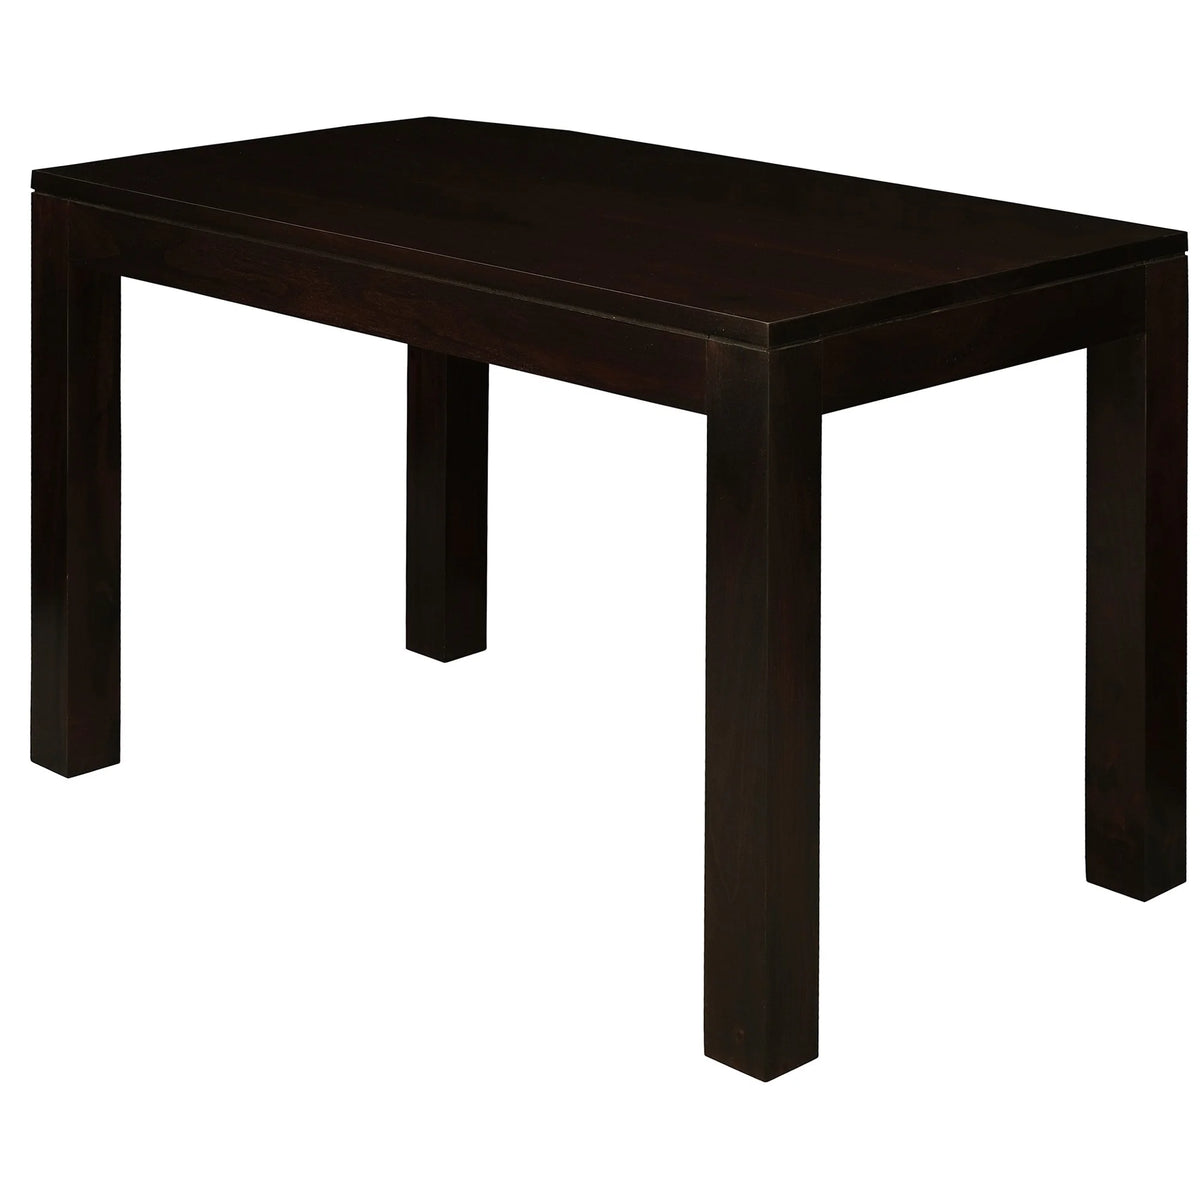 Amsterdam Timber Dining Table in Chocolate - 120cm - Notbrand